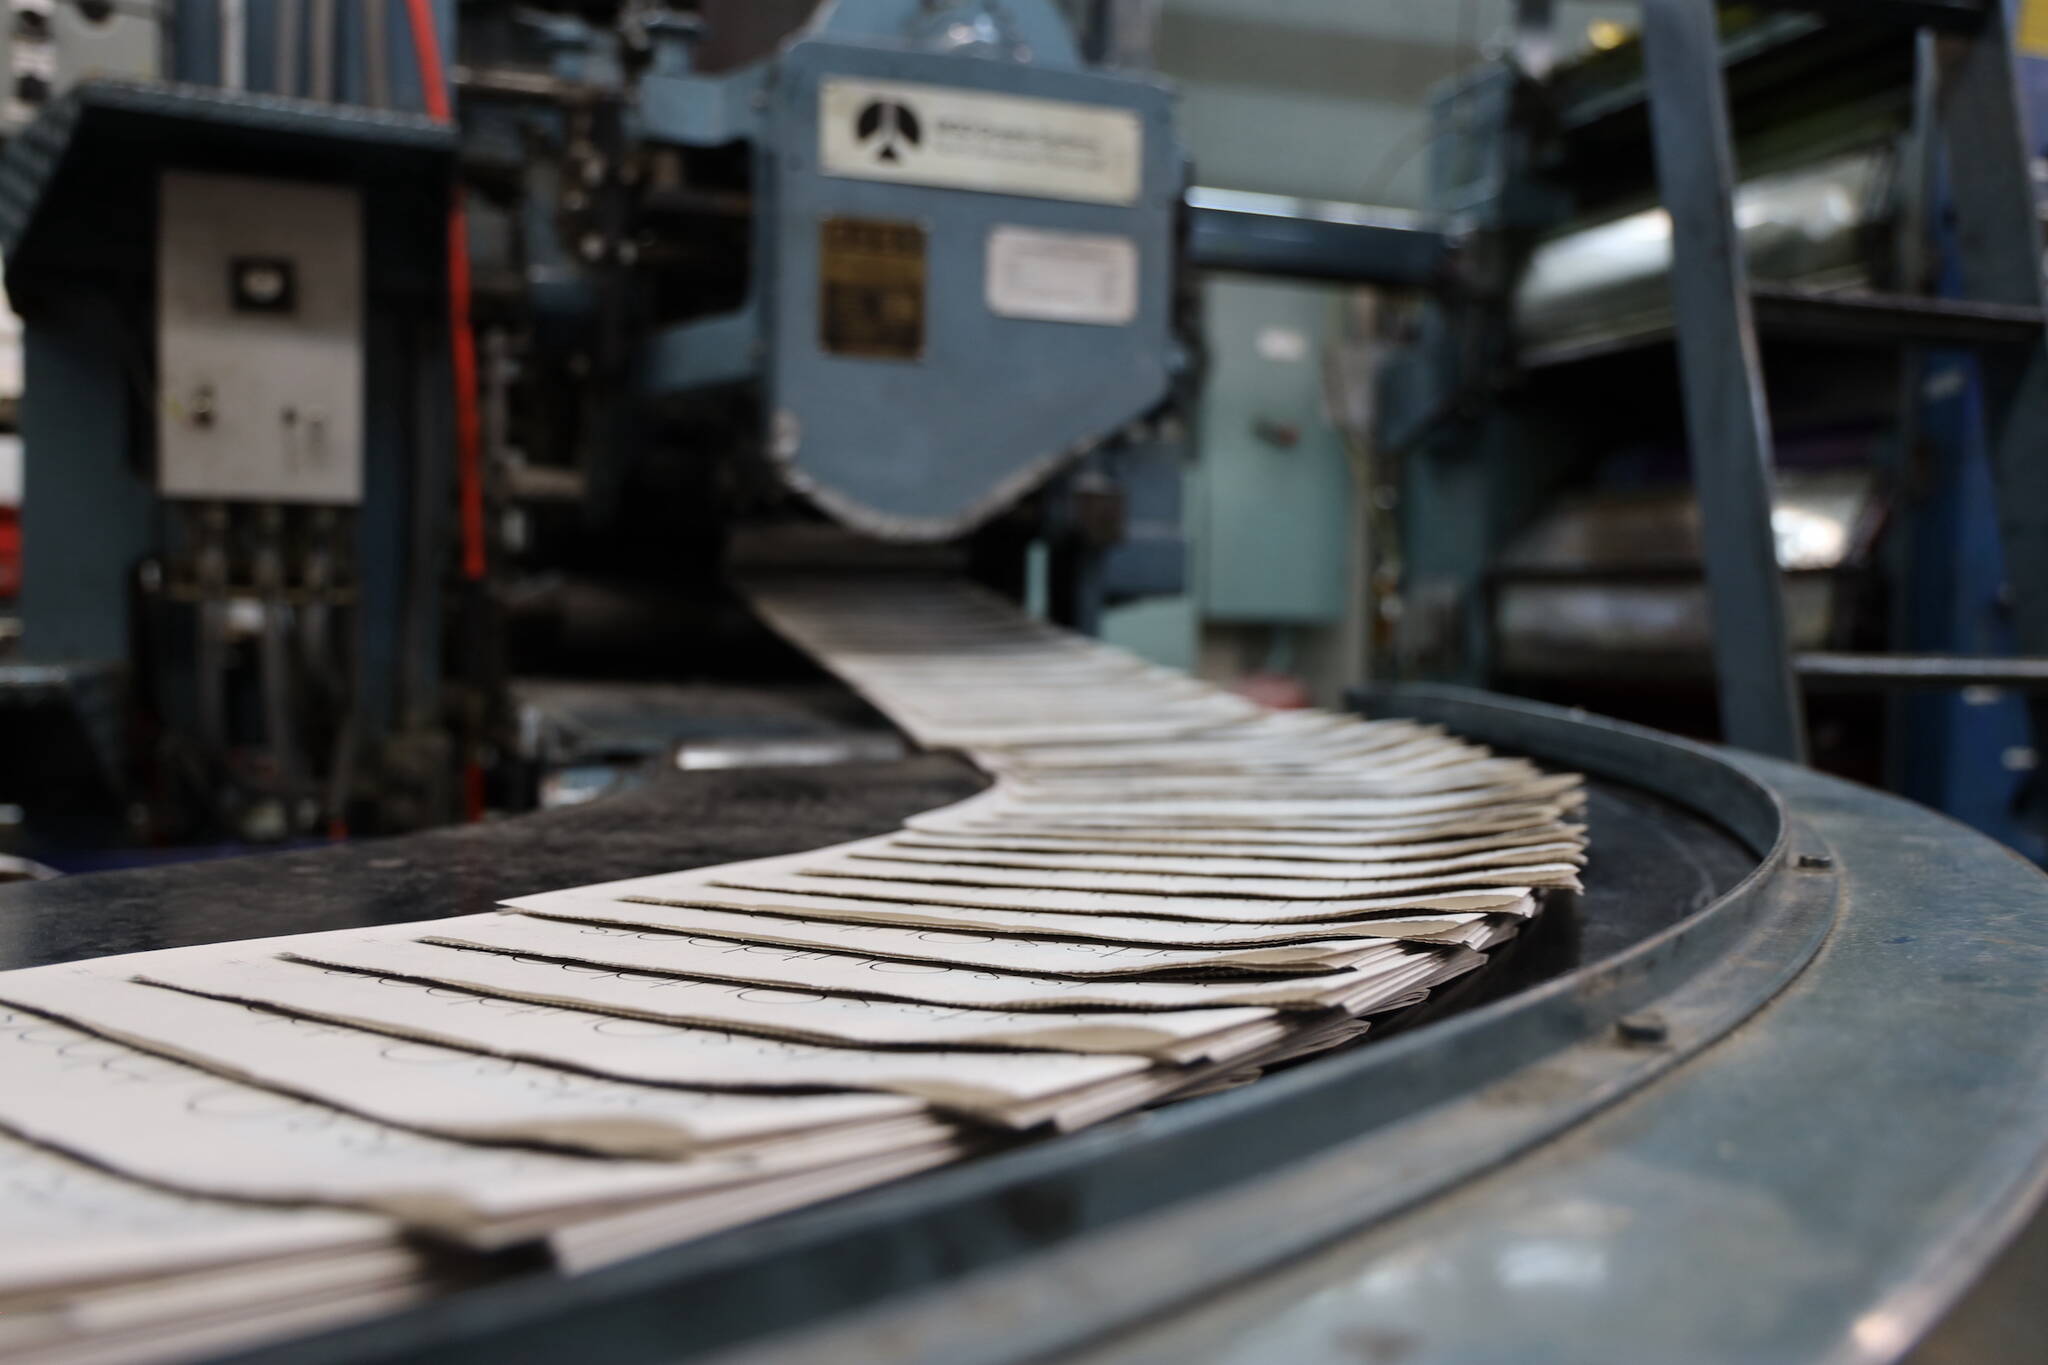 Freshly printed paper makes it way through the Juneau Empire printing press in Juneau Thursday evening. Beginning May 3, the Juneau Empire will be printed in Washington state, and delivered on Wednesdays and Saturdays. (Clarise Larson / Juneau Empire)